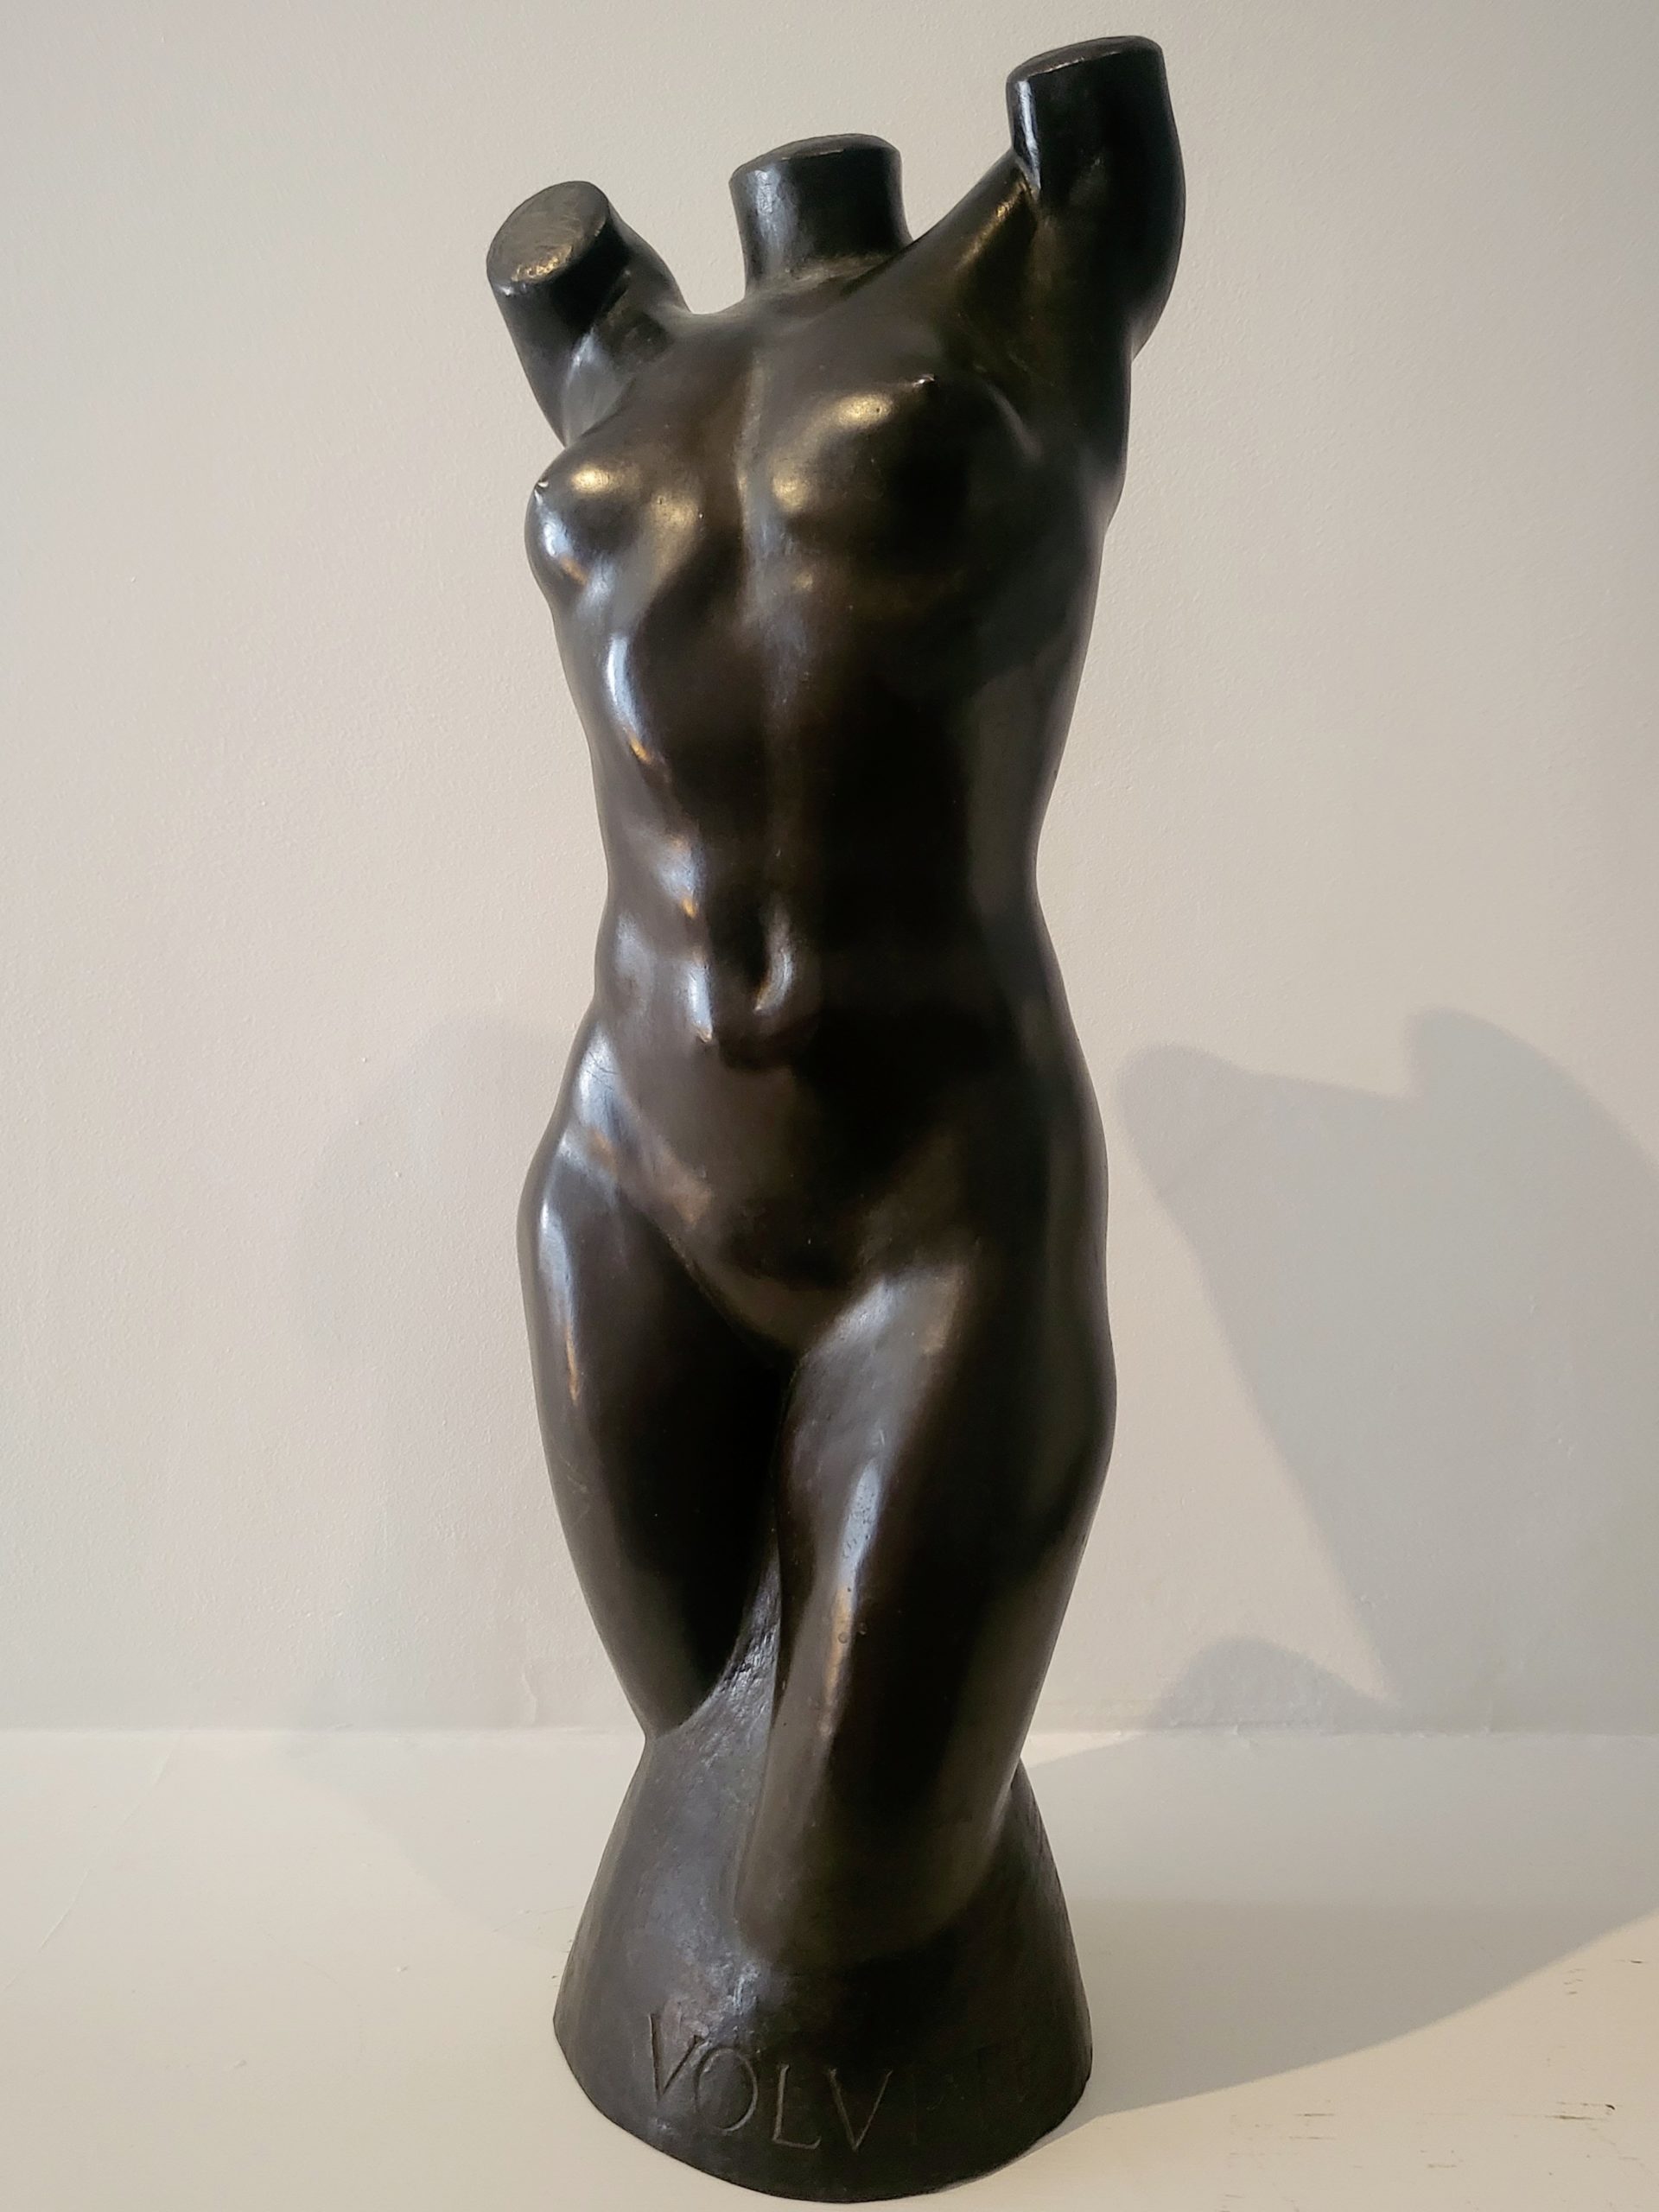 

											American Figurative  </b>

											<em>
												Now on view in New York</em> 

											<h4>
																							</h4>

		                																																													<i>Arthur Lee,</i>  
																																								Volupte, modeled 1915, 
																																								Bronze, 
																																								20 3/4 x 7 1/4 x 6 1/4 inches  
																								
		                				